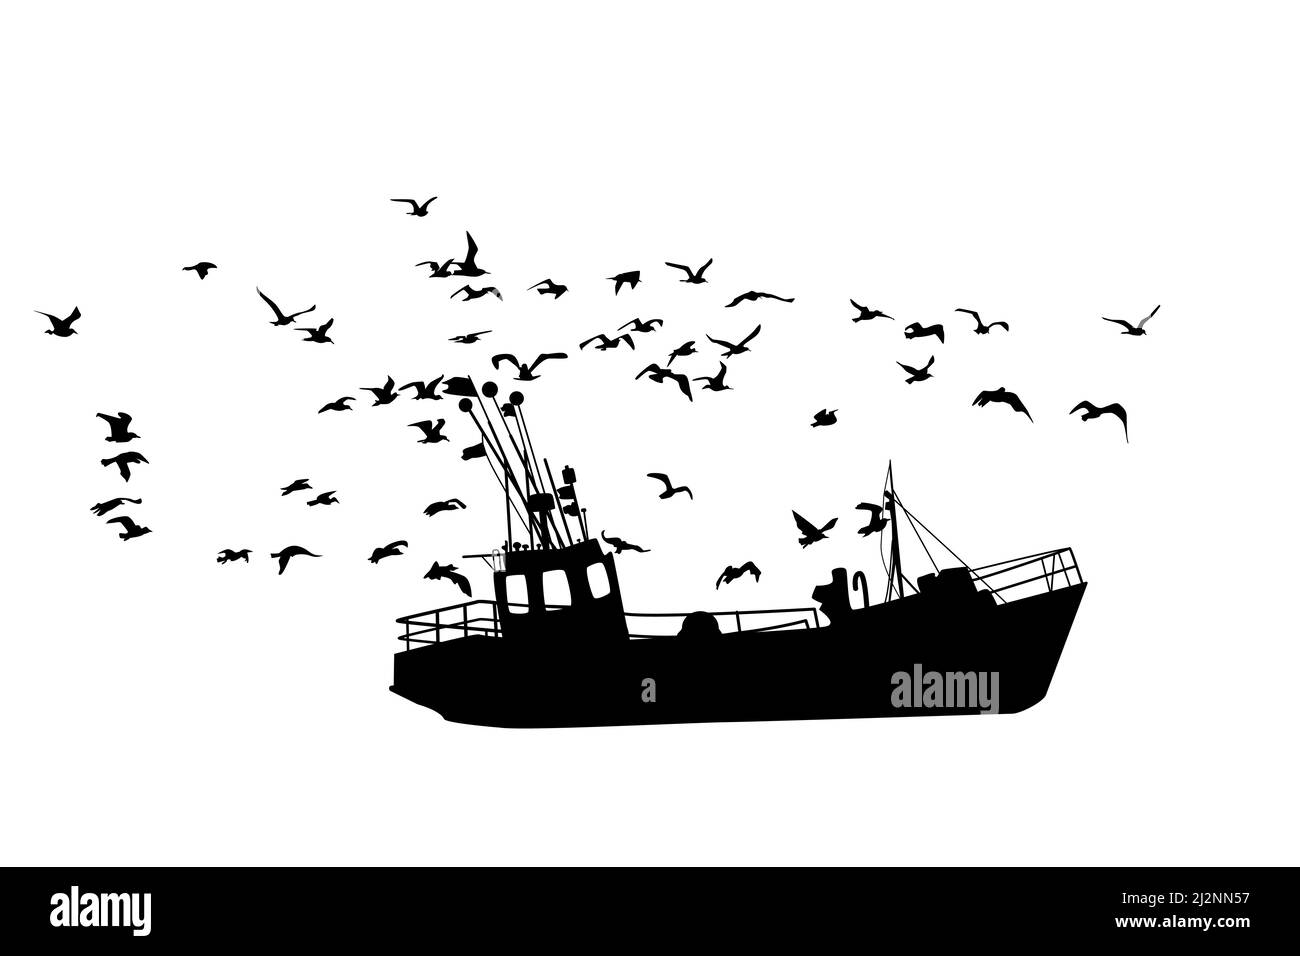 Fishing ship icon isolated on white background. Fishing boat with many seagulls. Side view of commercial trawler. Industrial seafood production.Vector Stock Vector